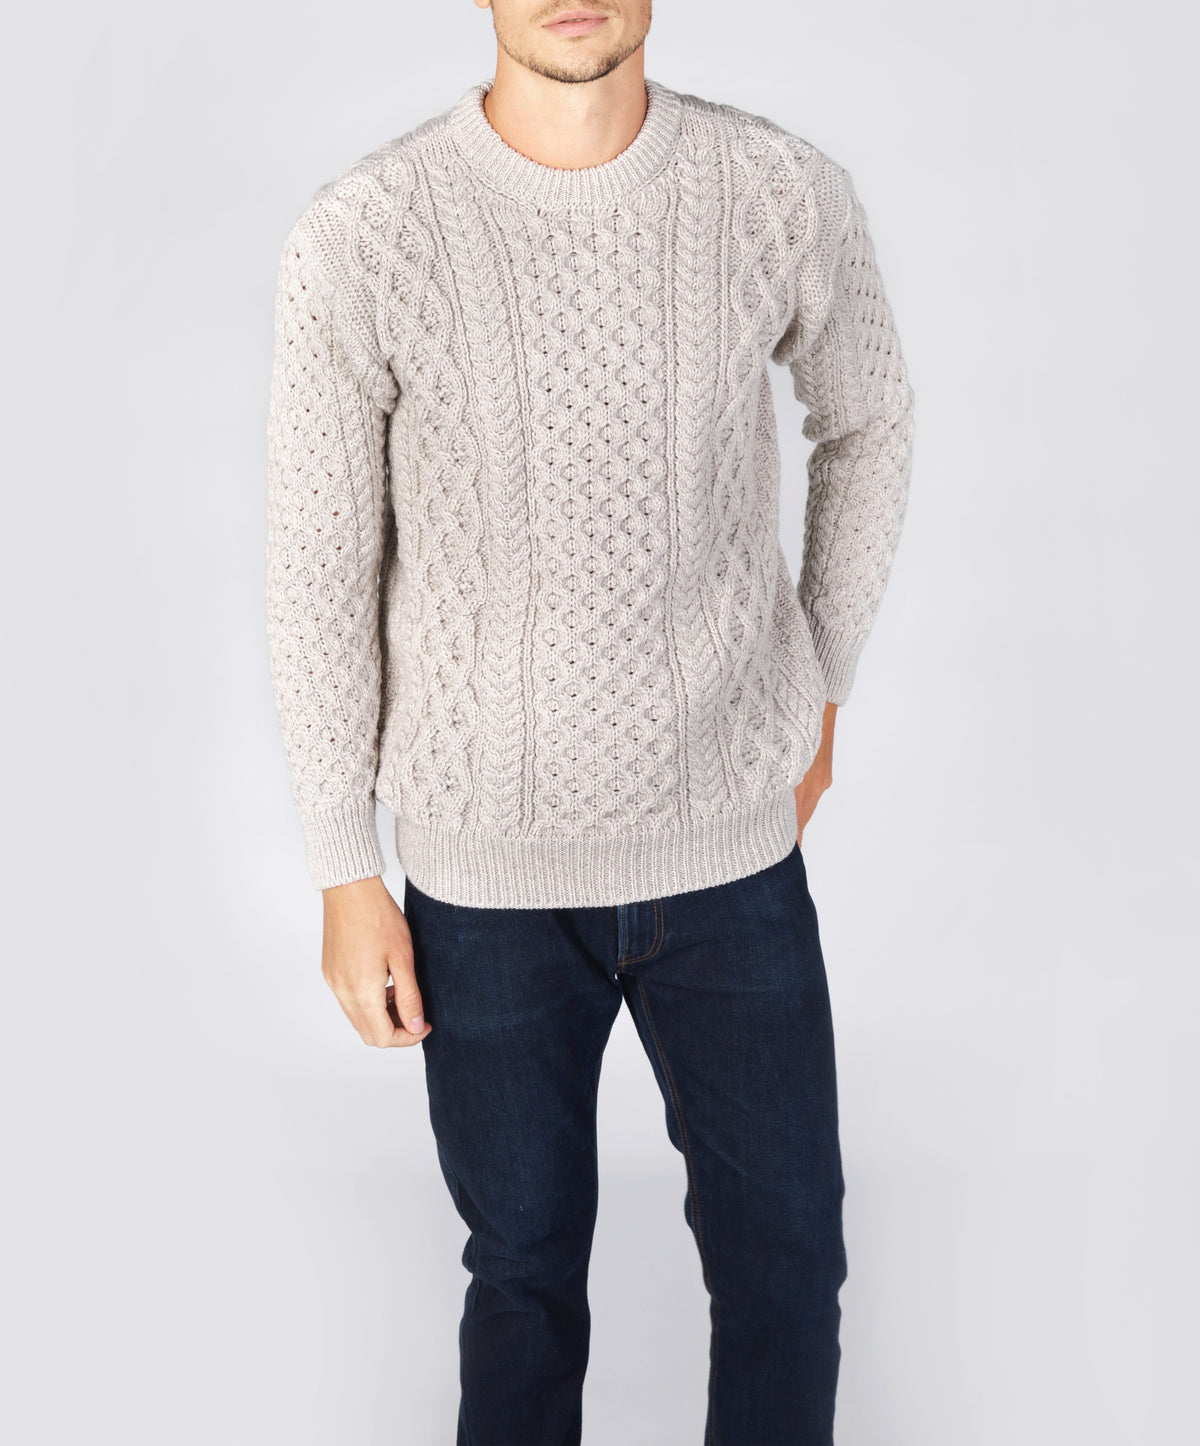 Aran Sweater, white, blue, grey cable knit sweater